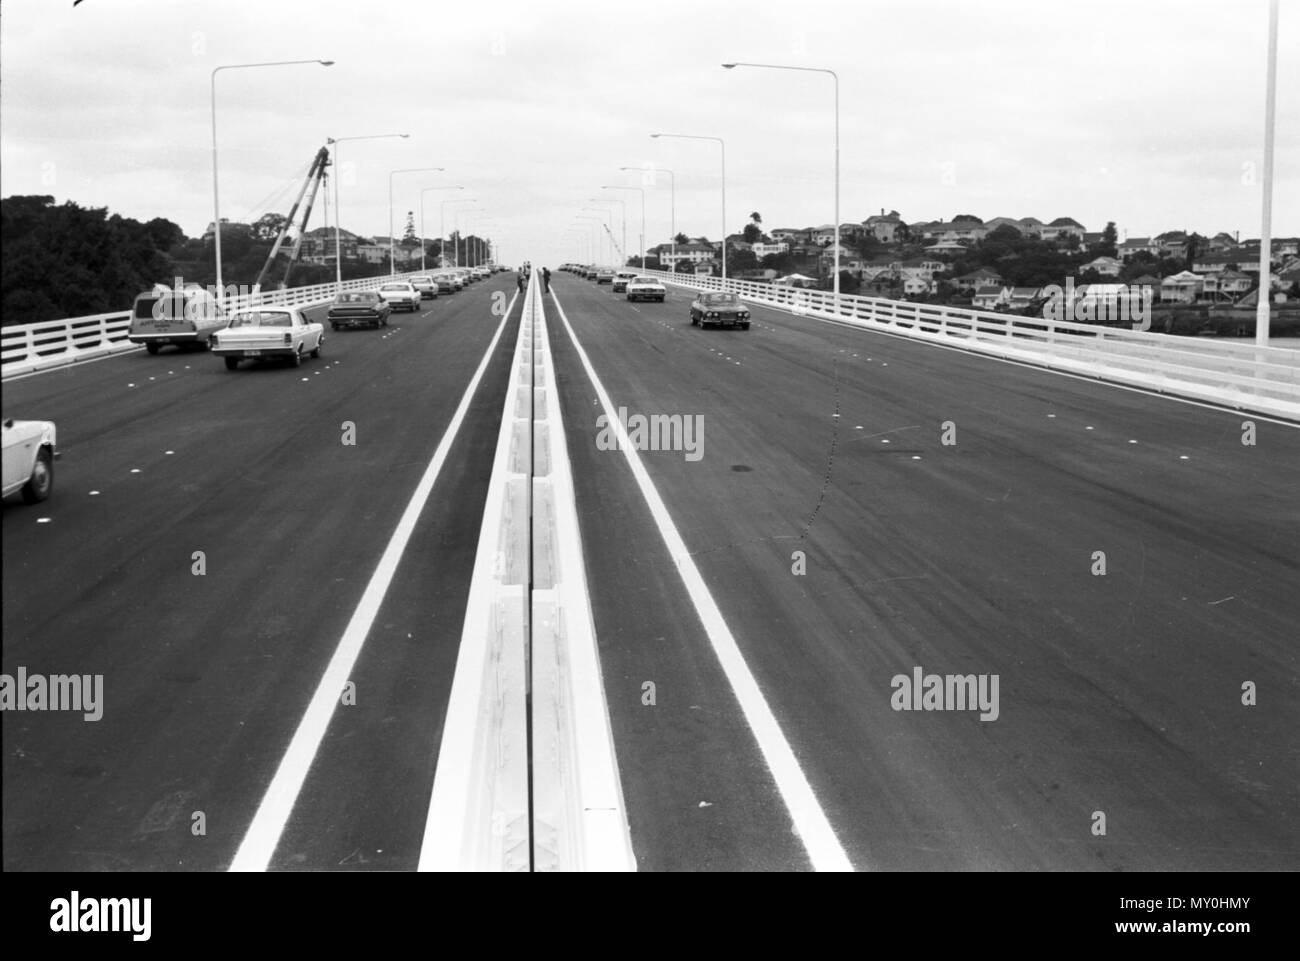 First public traffic on the Captain Cook Bridge, Brisbane, 13. Construction of the Captain Cook Bridge commenced in 1968 and was completed in 1972. The main span of 183 metres was the precast prestressed concrete free-cantilever bridge for 3 months until it was overtaken by the Harada Bridge in Japan. Stock Photo